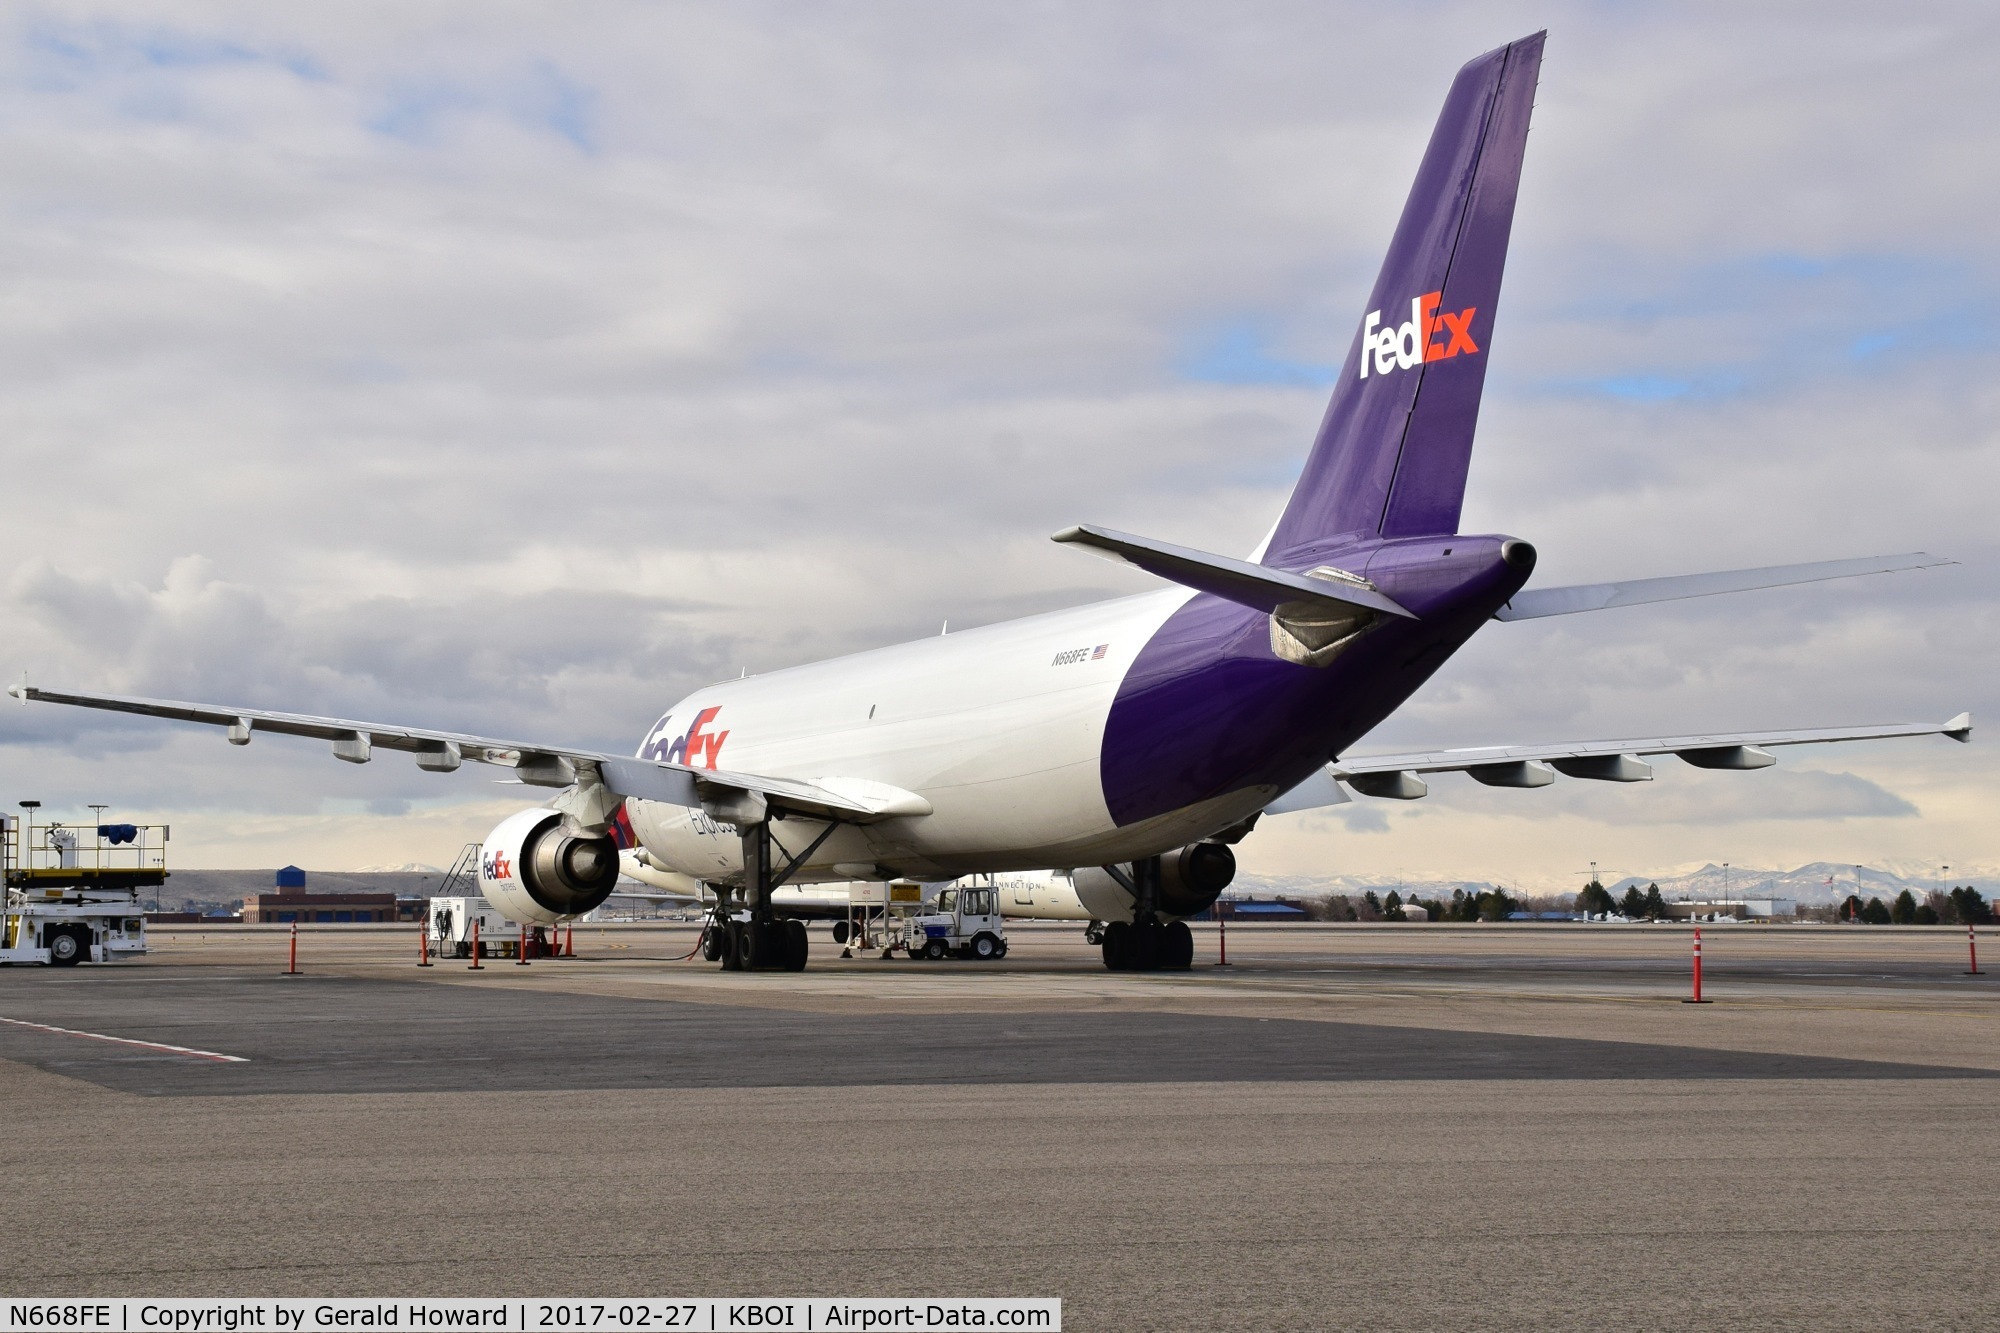 N668FE, 1996 Airbus A300F4-605R C/N 772, Parked on the FedEx ramp. Monday is their day off.